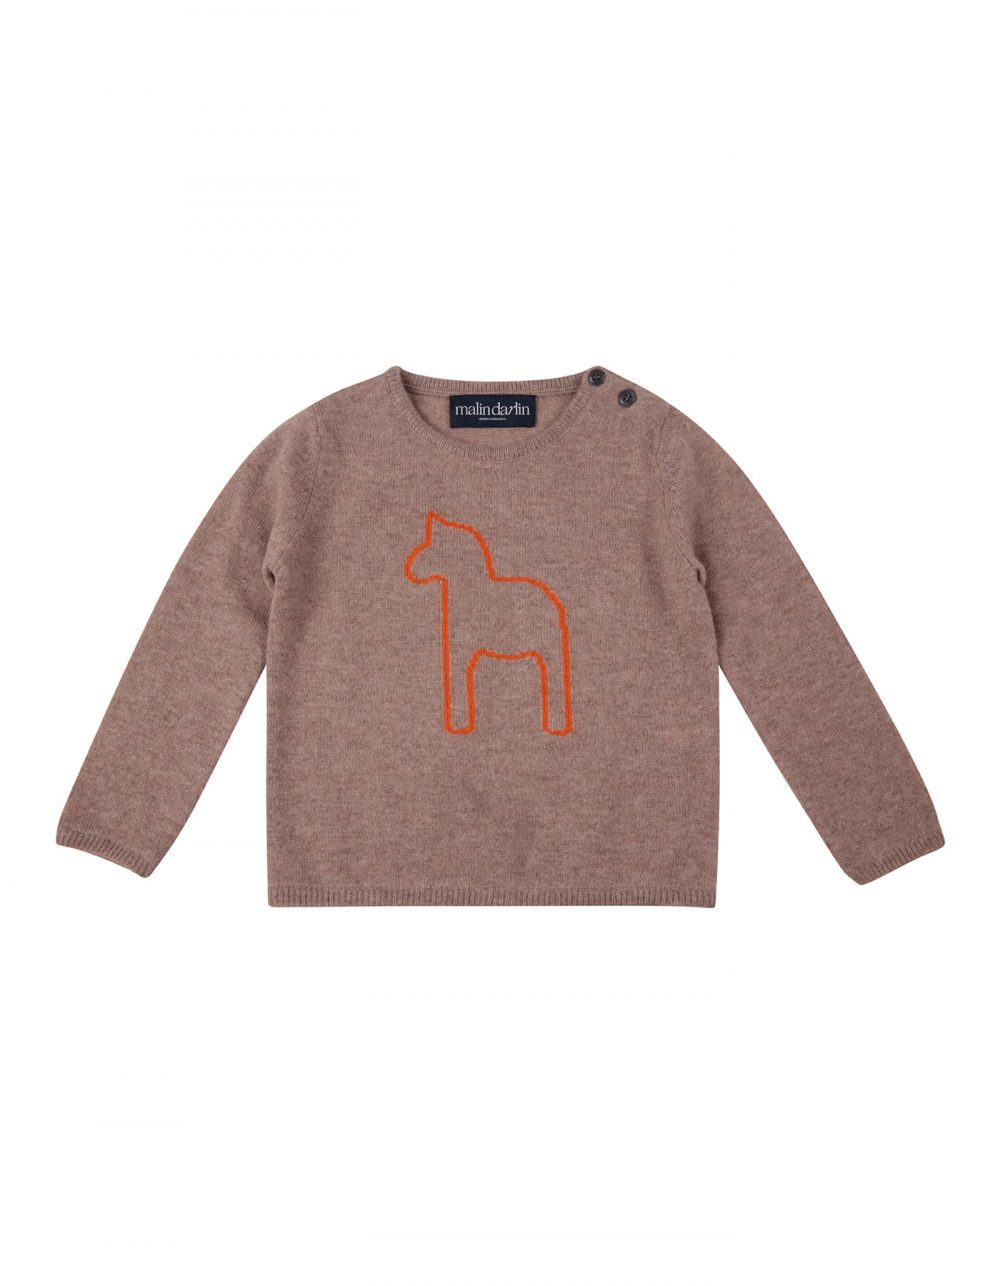 The malin darlin Baby Pony beige kids cashmere jumper pictured flat on a white backdrop.